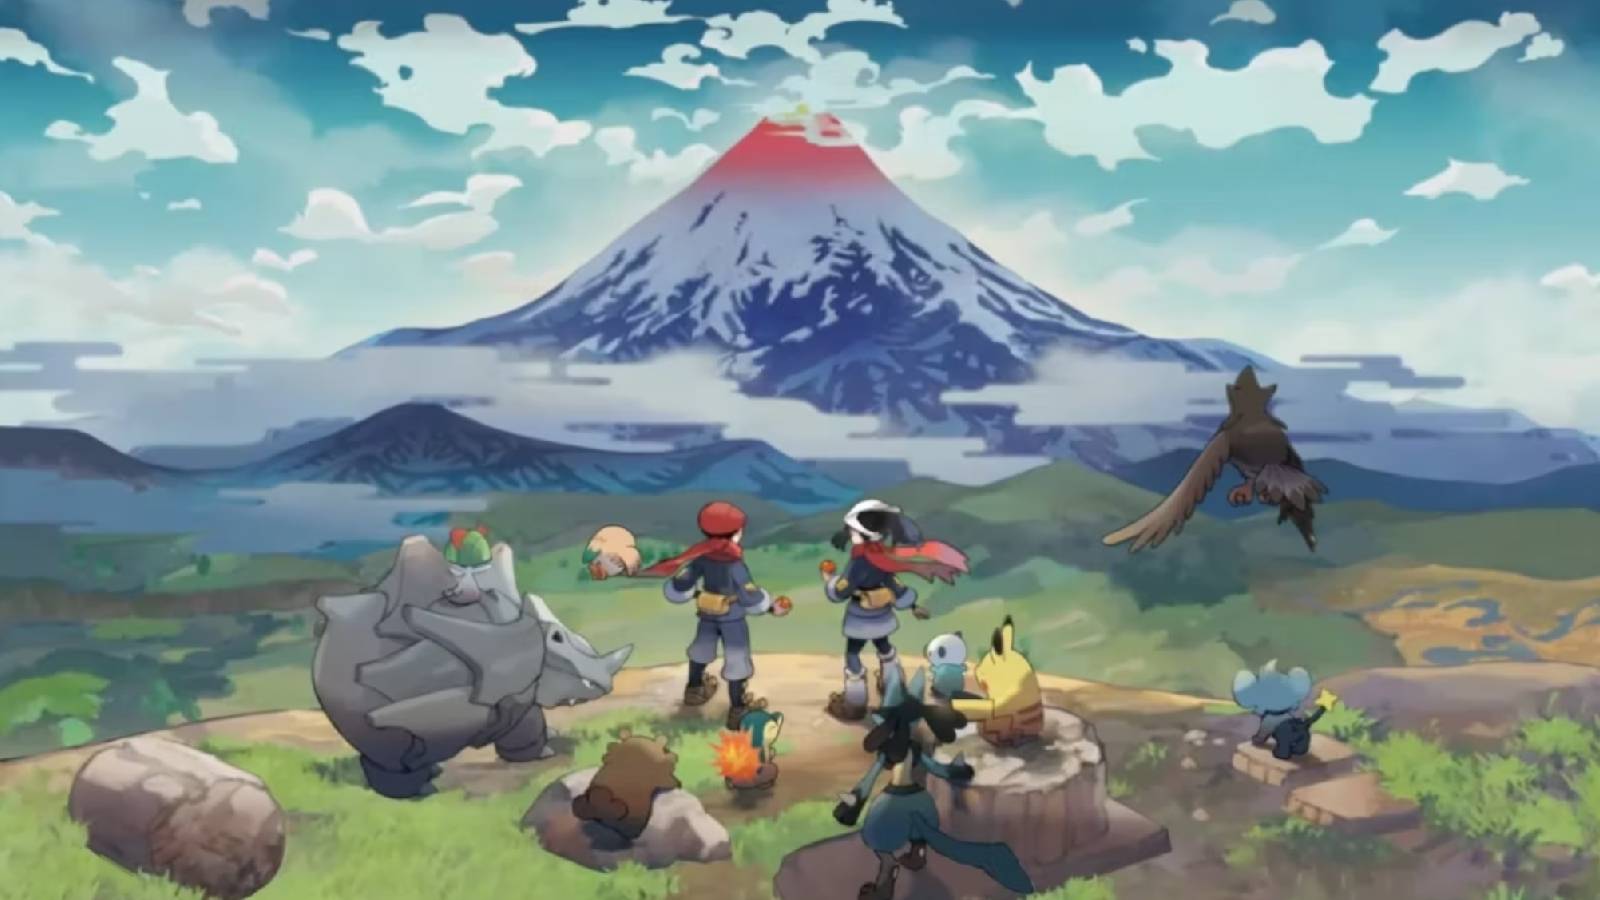 Key art for Pokemon Legends Arceus shows a trainer looking over a vista